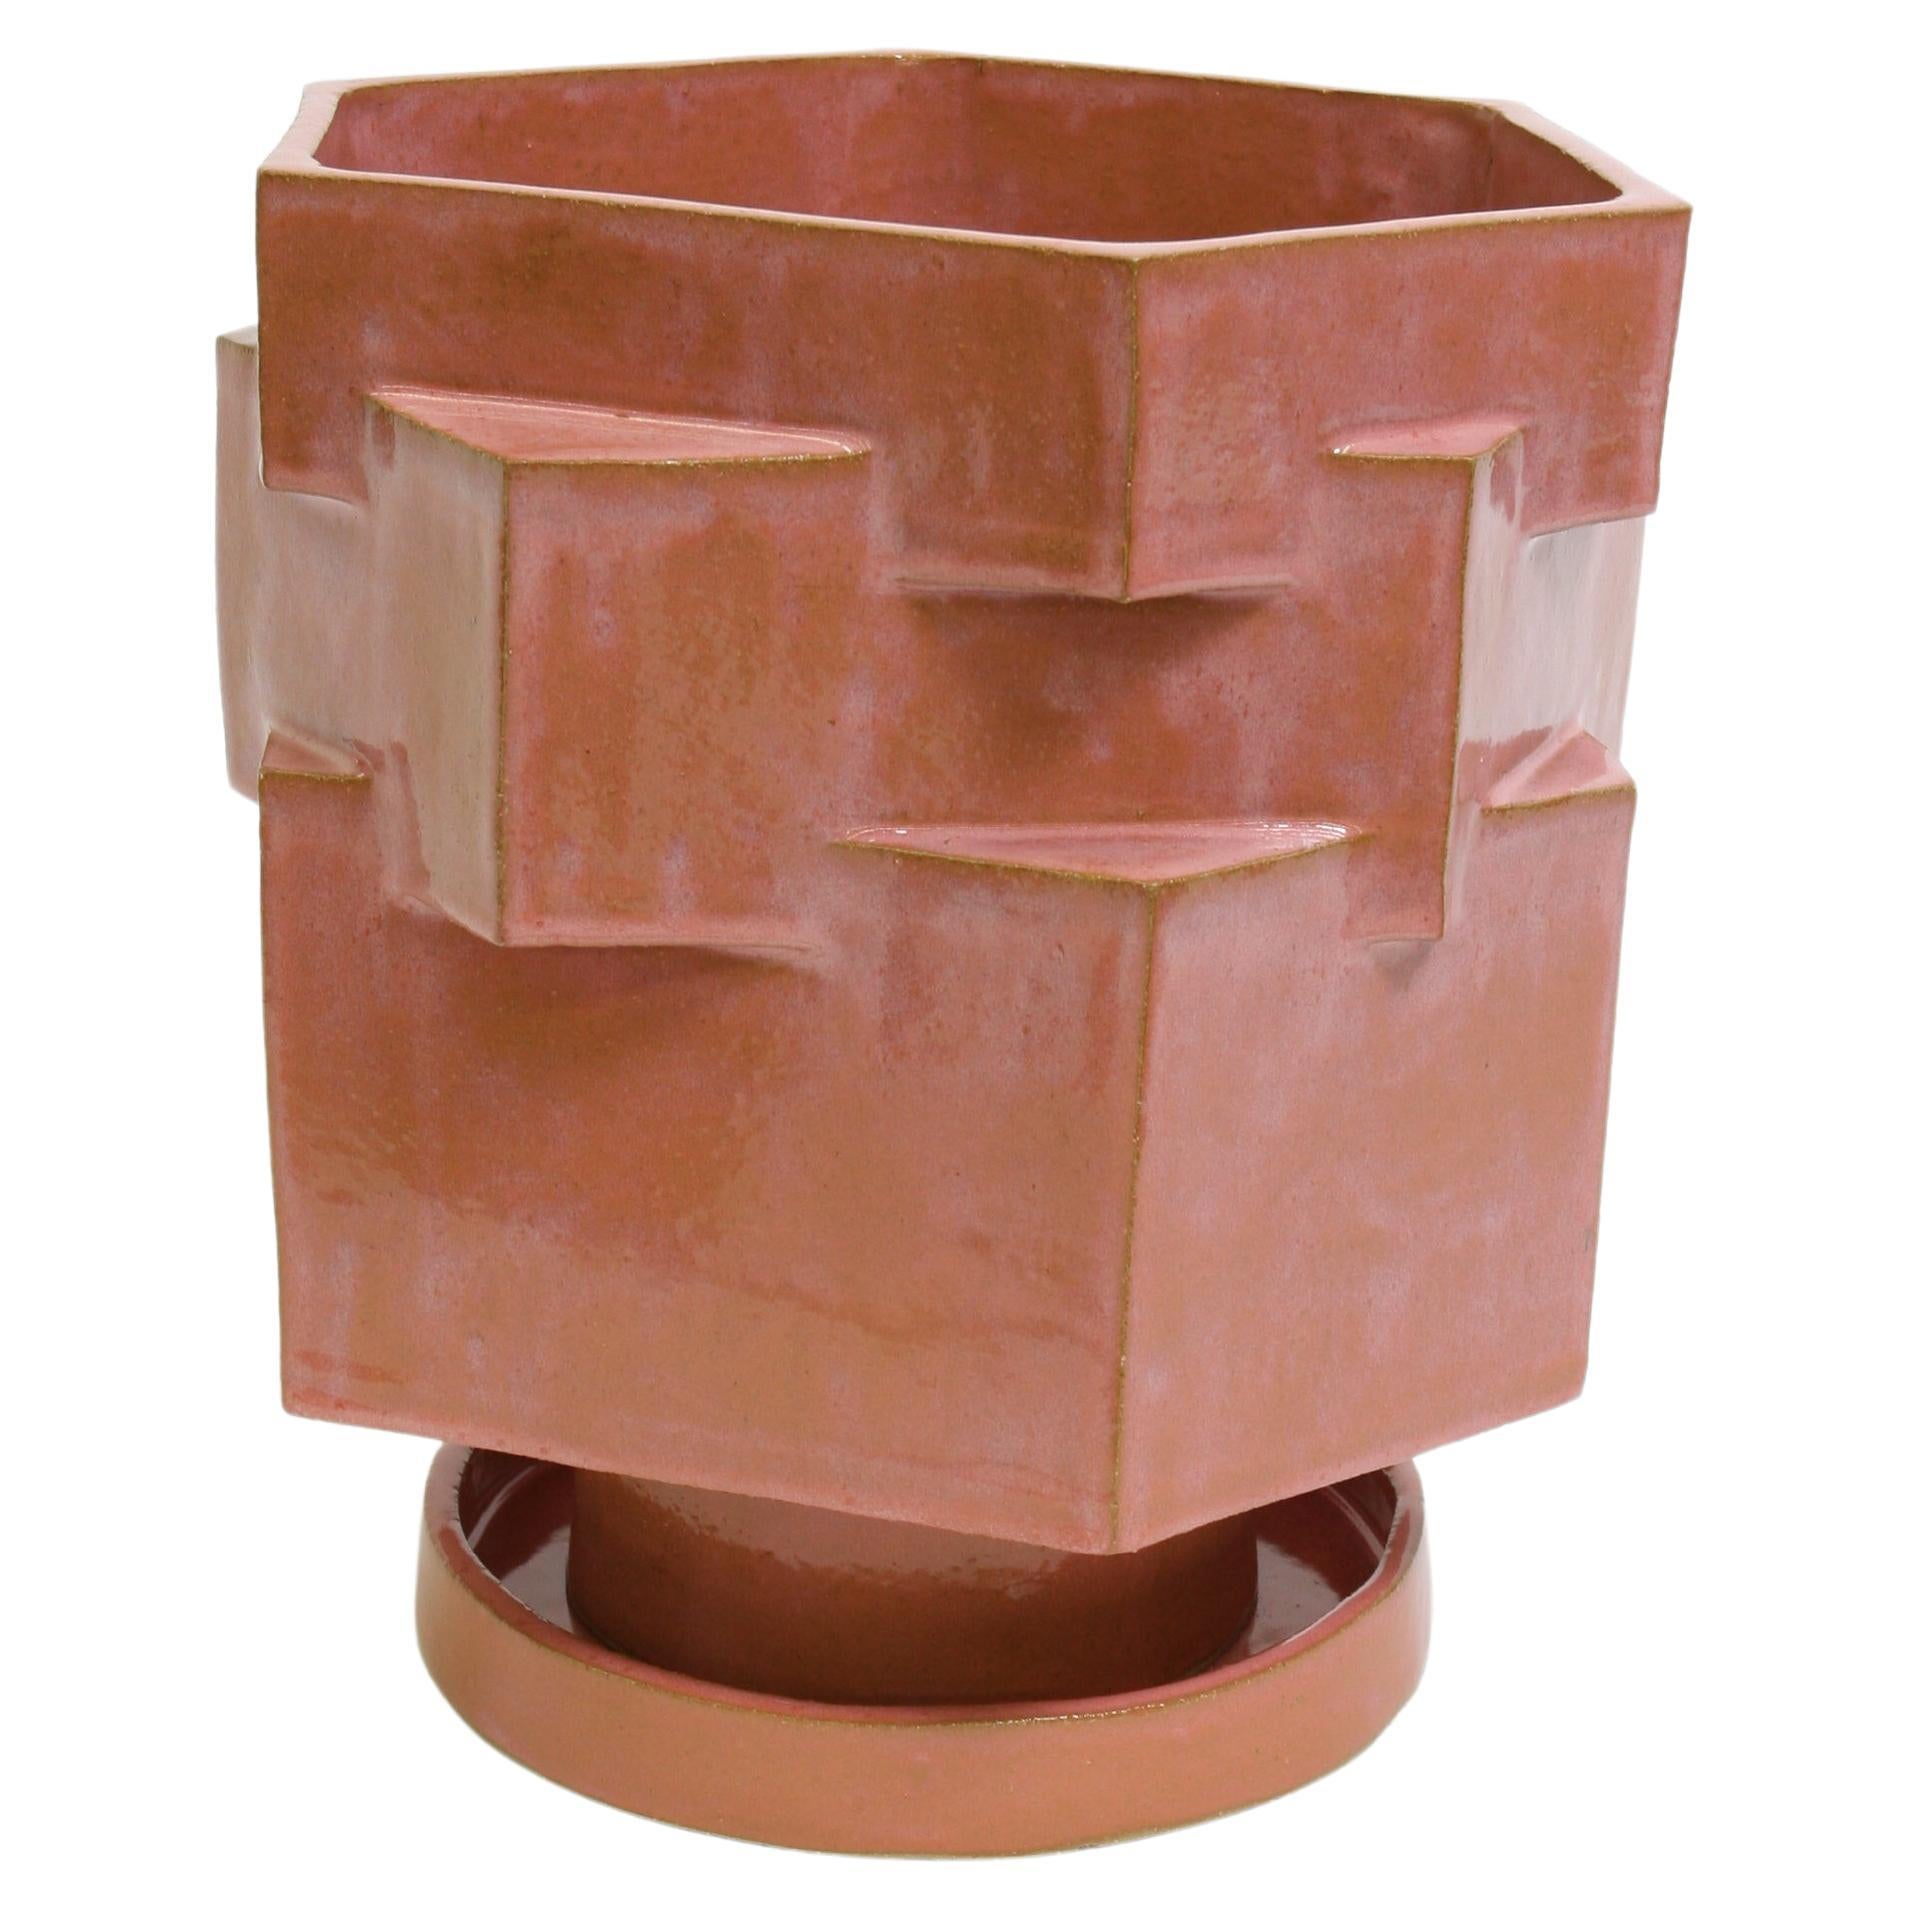 Ceramic Hex Planter in Sunset Pink by Bzippy